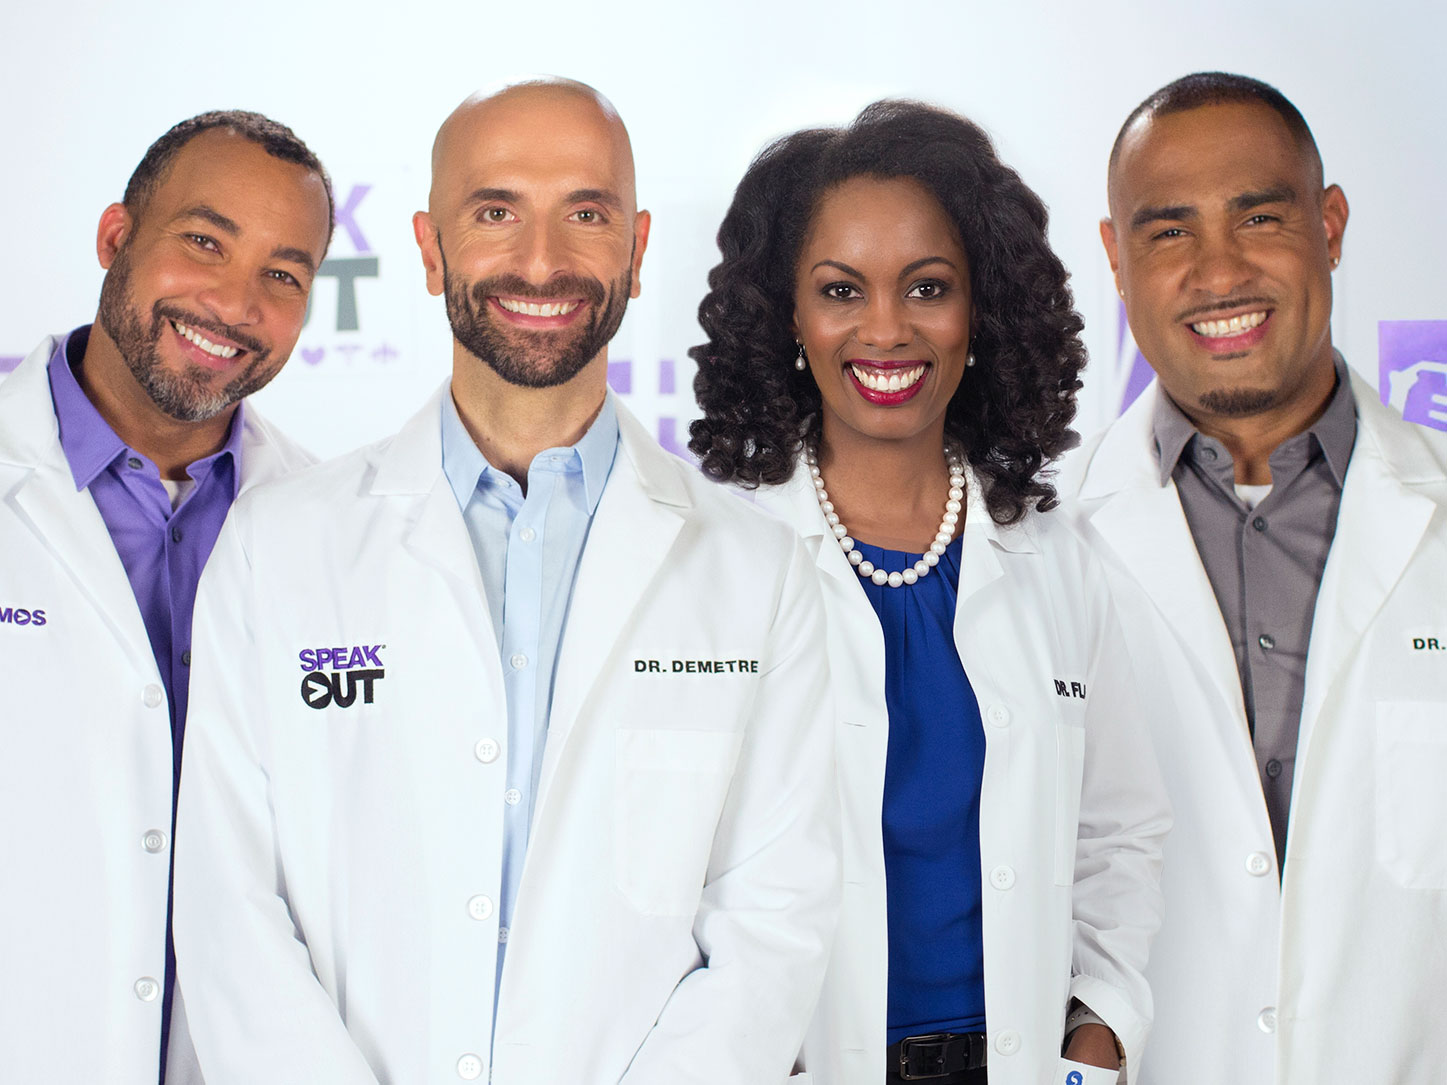 Four HIV specialists smiling